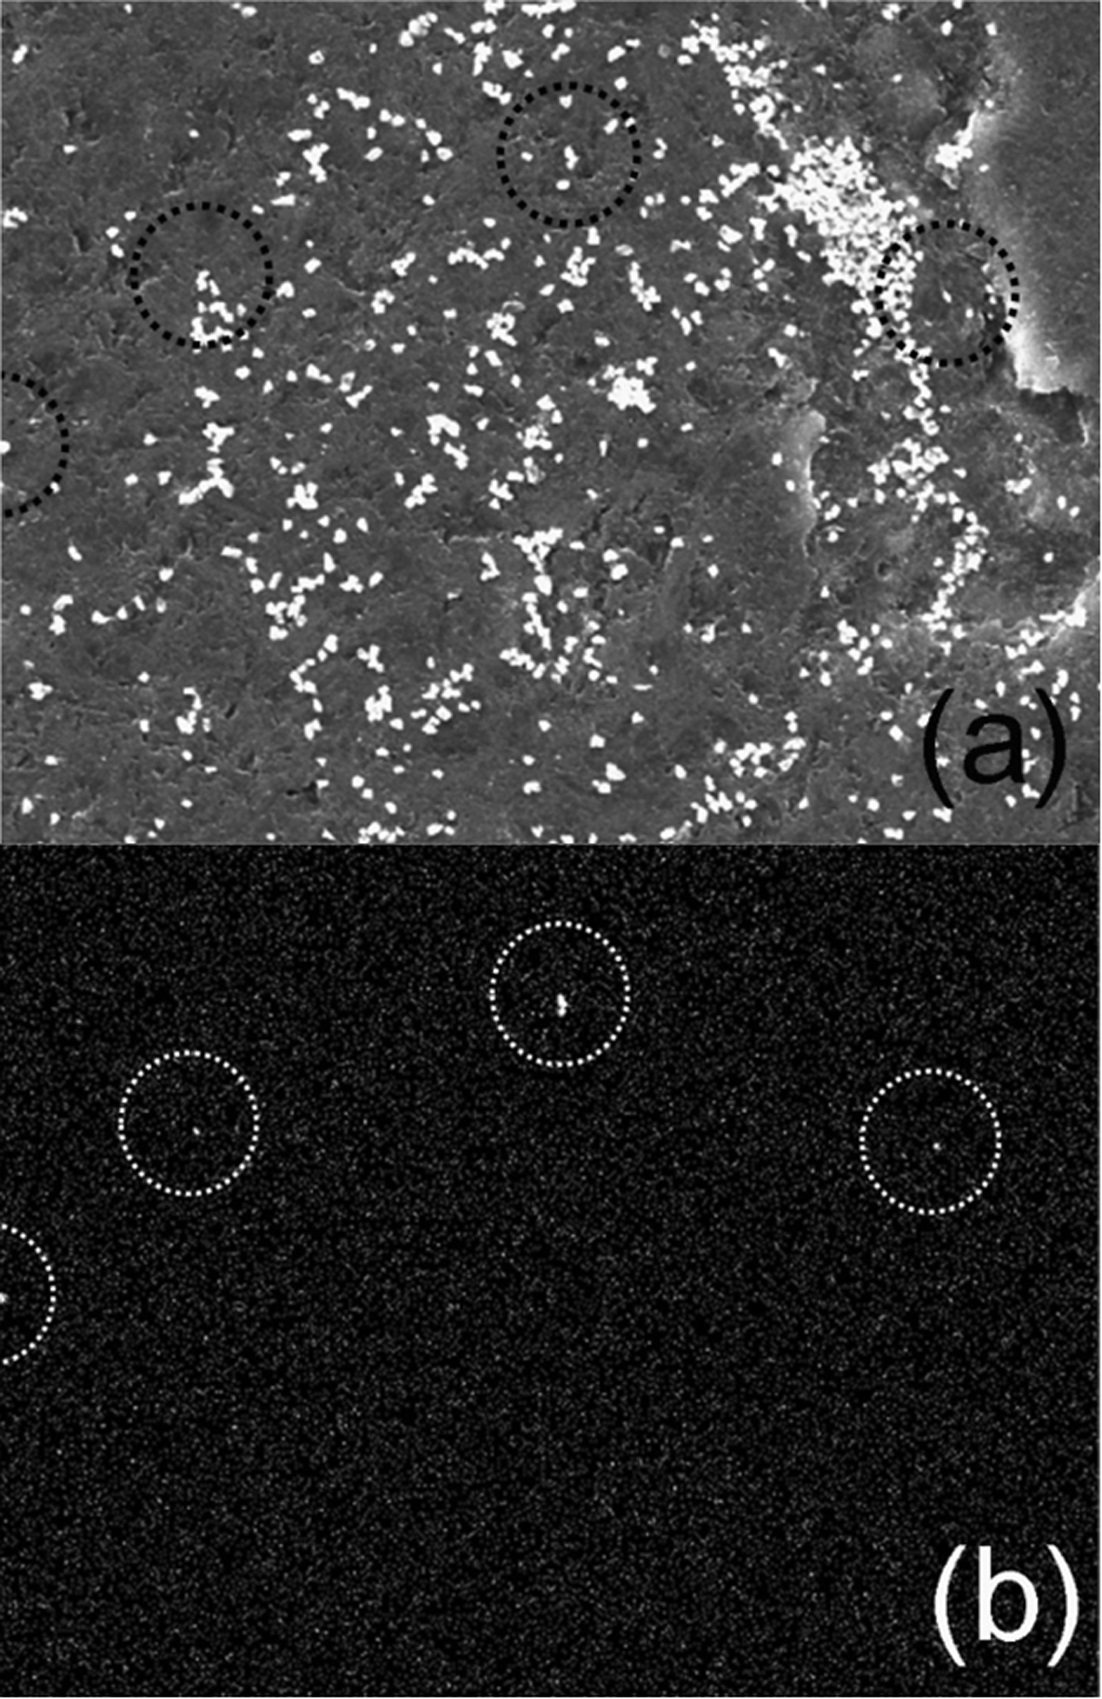 SEM image of a portion of the NUSIMEP-6 sample (a) and the uranium mapping image by EDS (b).